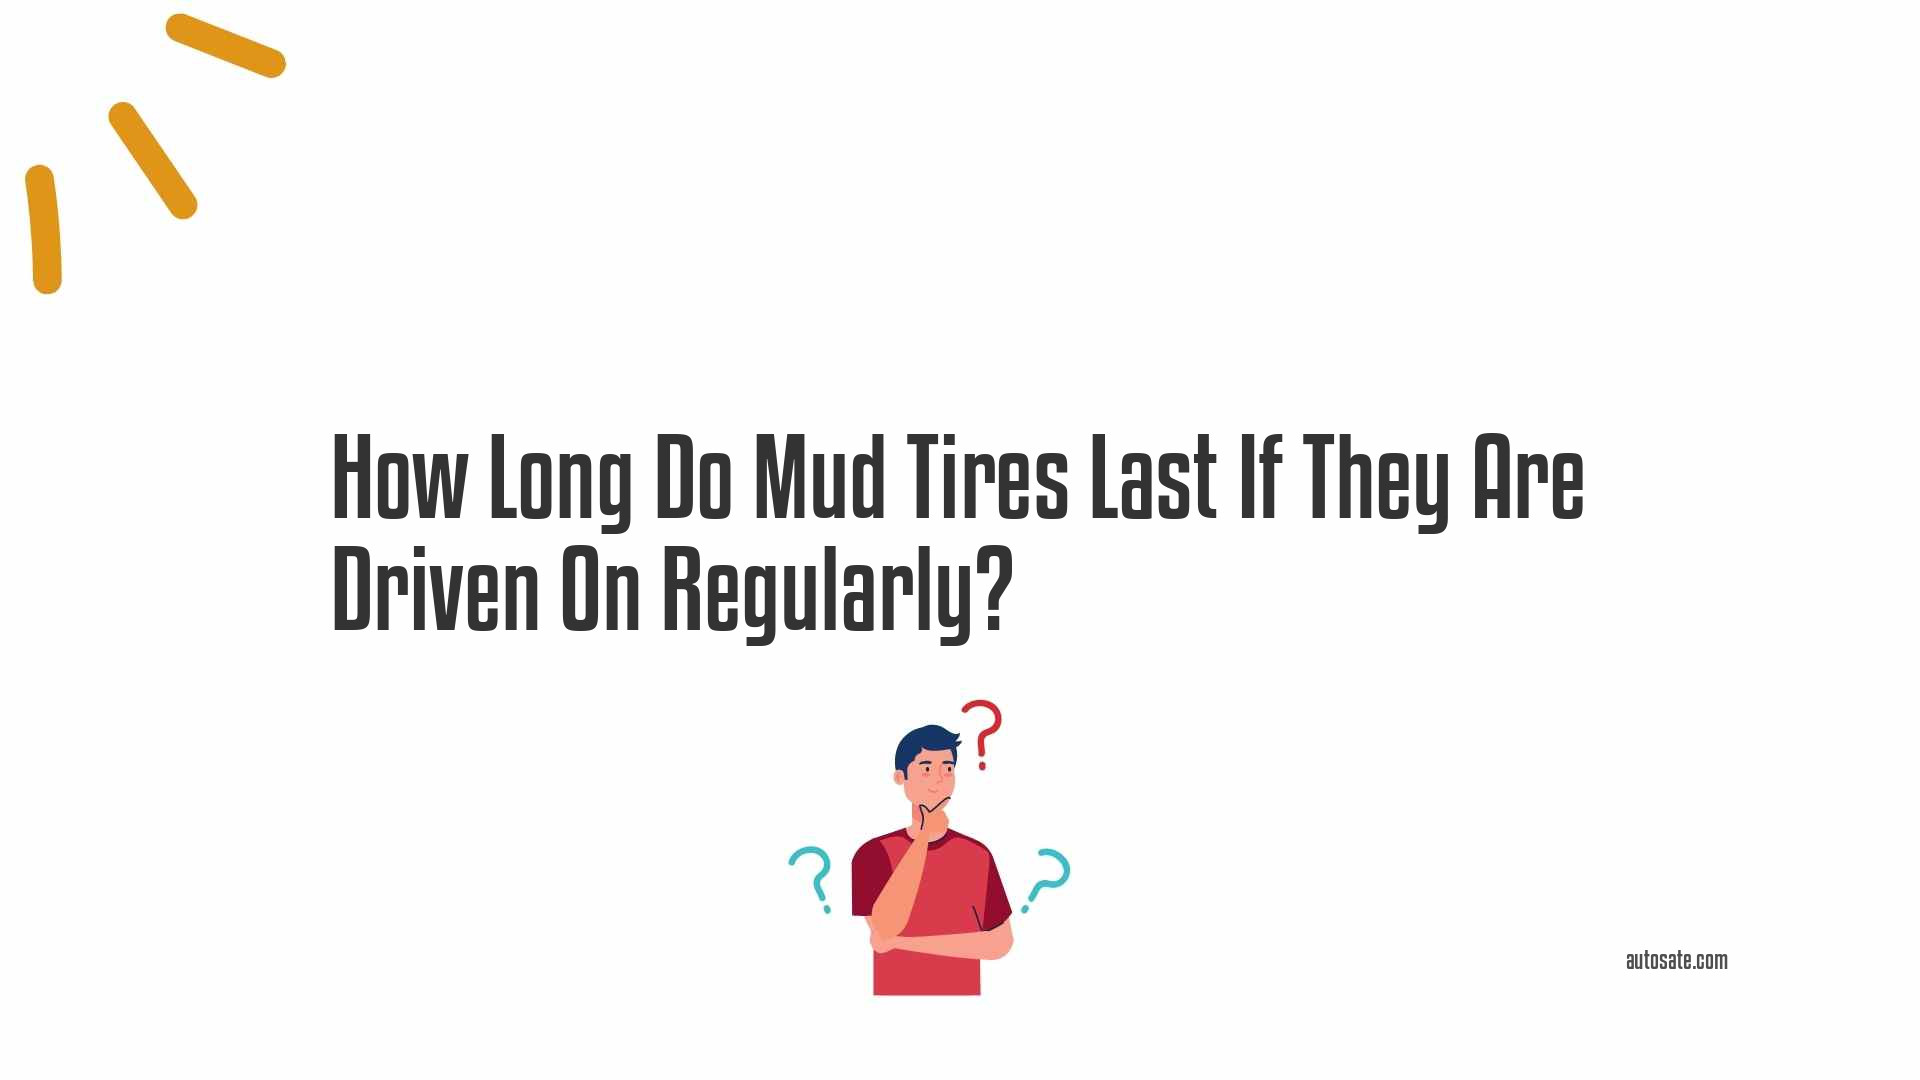 How Long Do Mud Tires Last If They Are Driven On Regularly?